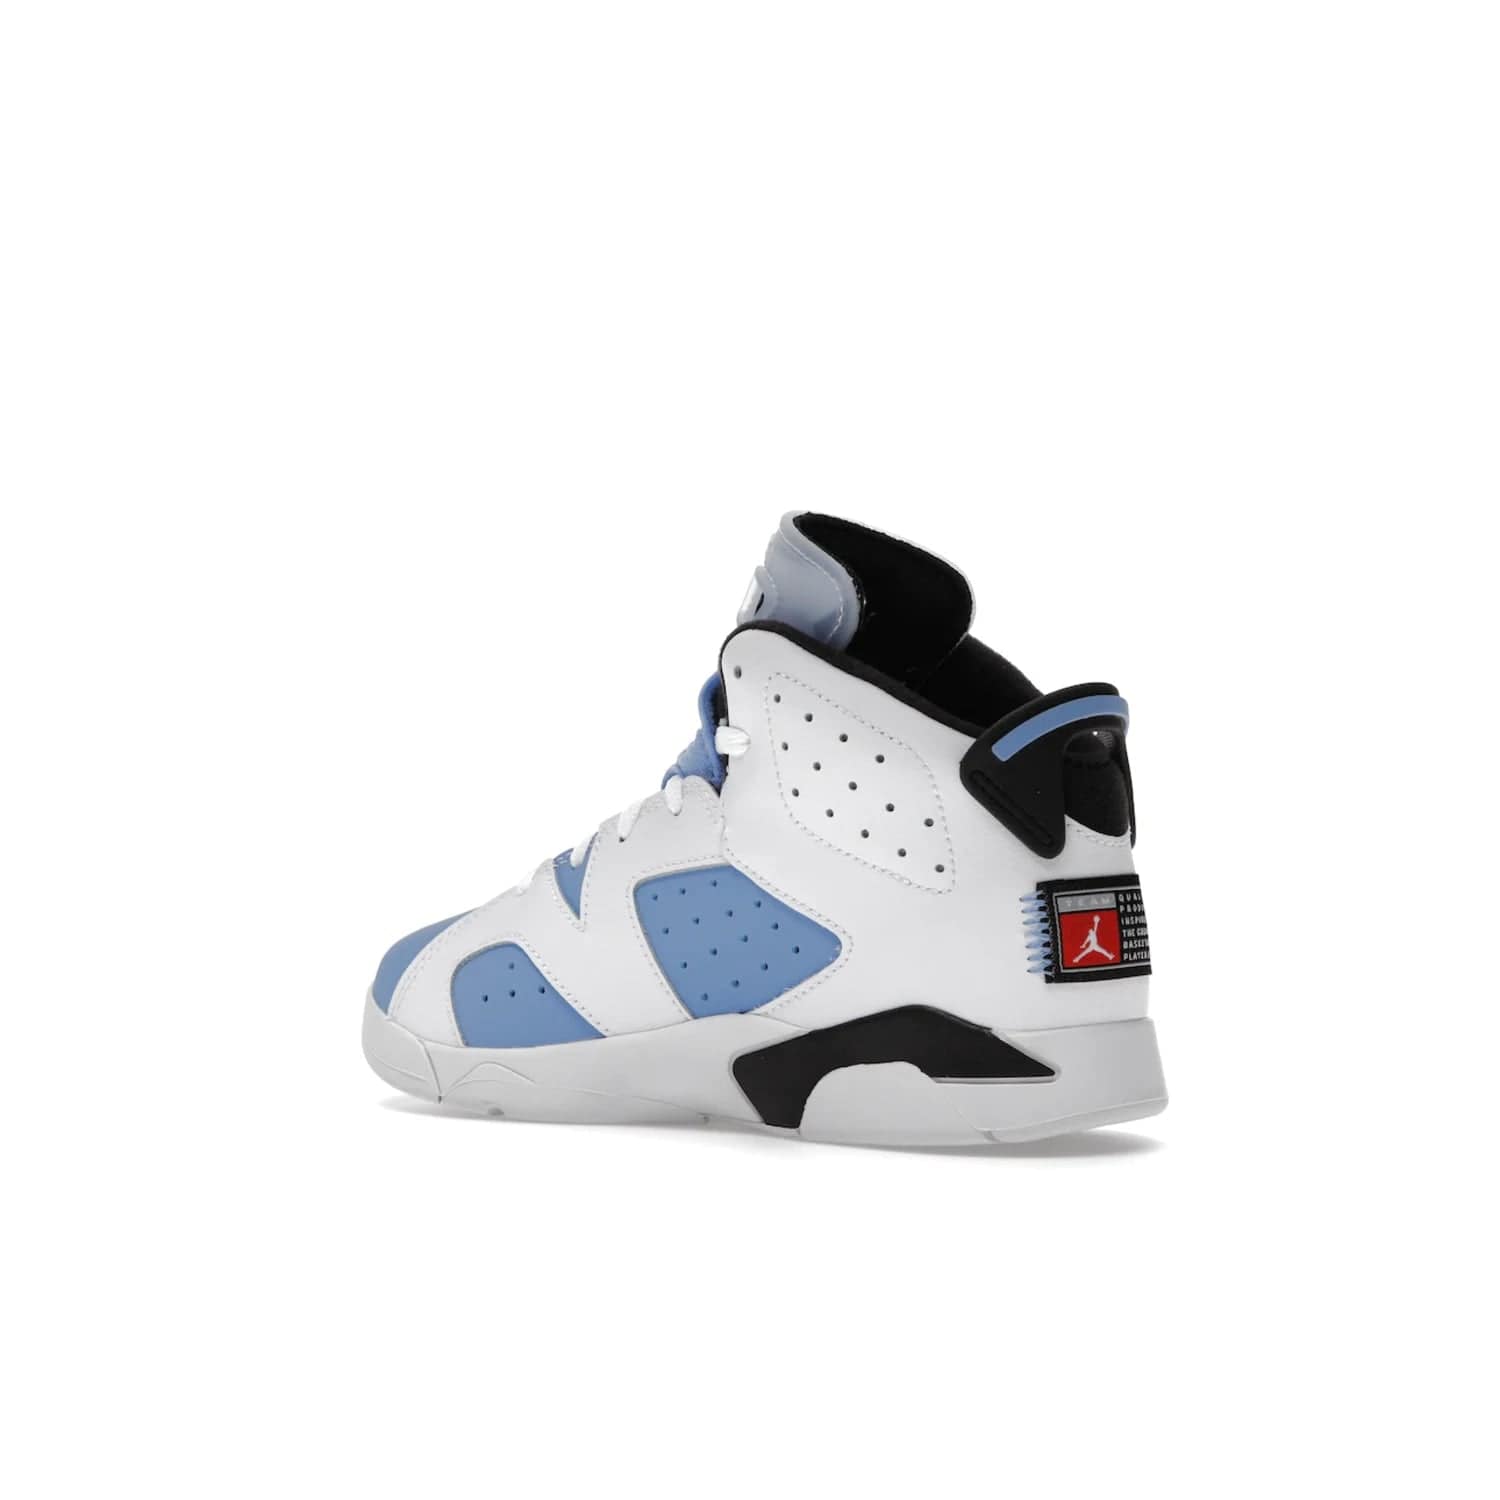 Jordan 6 Retro UNC White (PS) - Image 23 - Only at www.BallersClubKickz.com - The Air Jordan 6 Retro UNC White PS celebrates Michael Jordan's alma mater, the University of North Carolina. It features a classic color-blocking of the iconic Jordan 6 Carmine and a stitched Jordan Team patch. This must-have sneaker released on April 27th, 2022. Referencing the university colors, get this shoe for a stylish and timeless style with university pride.